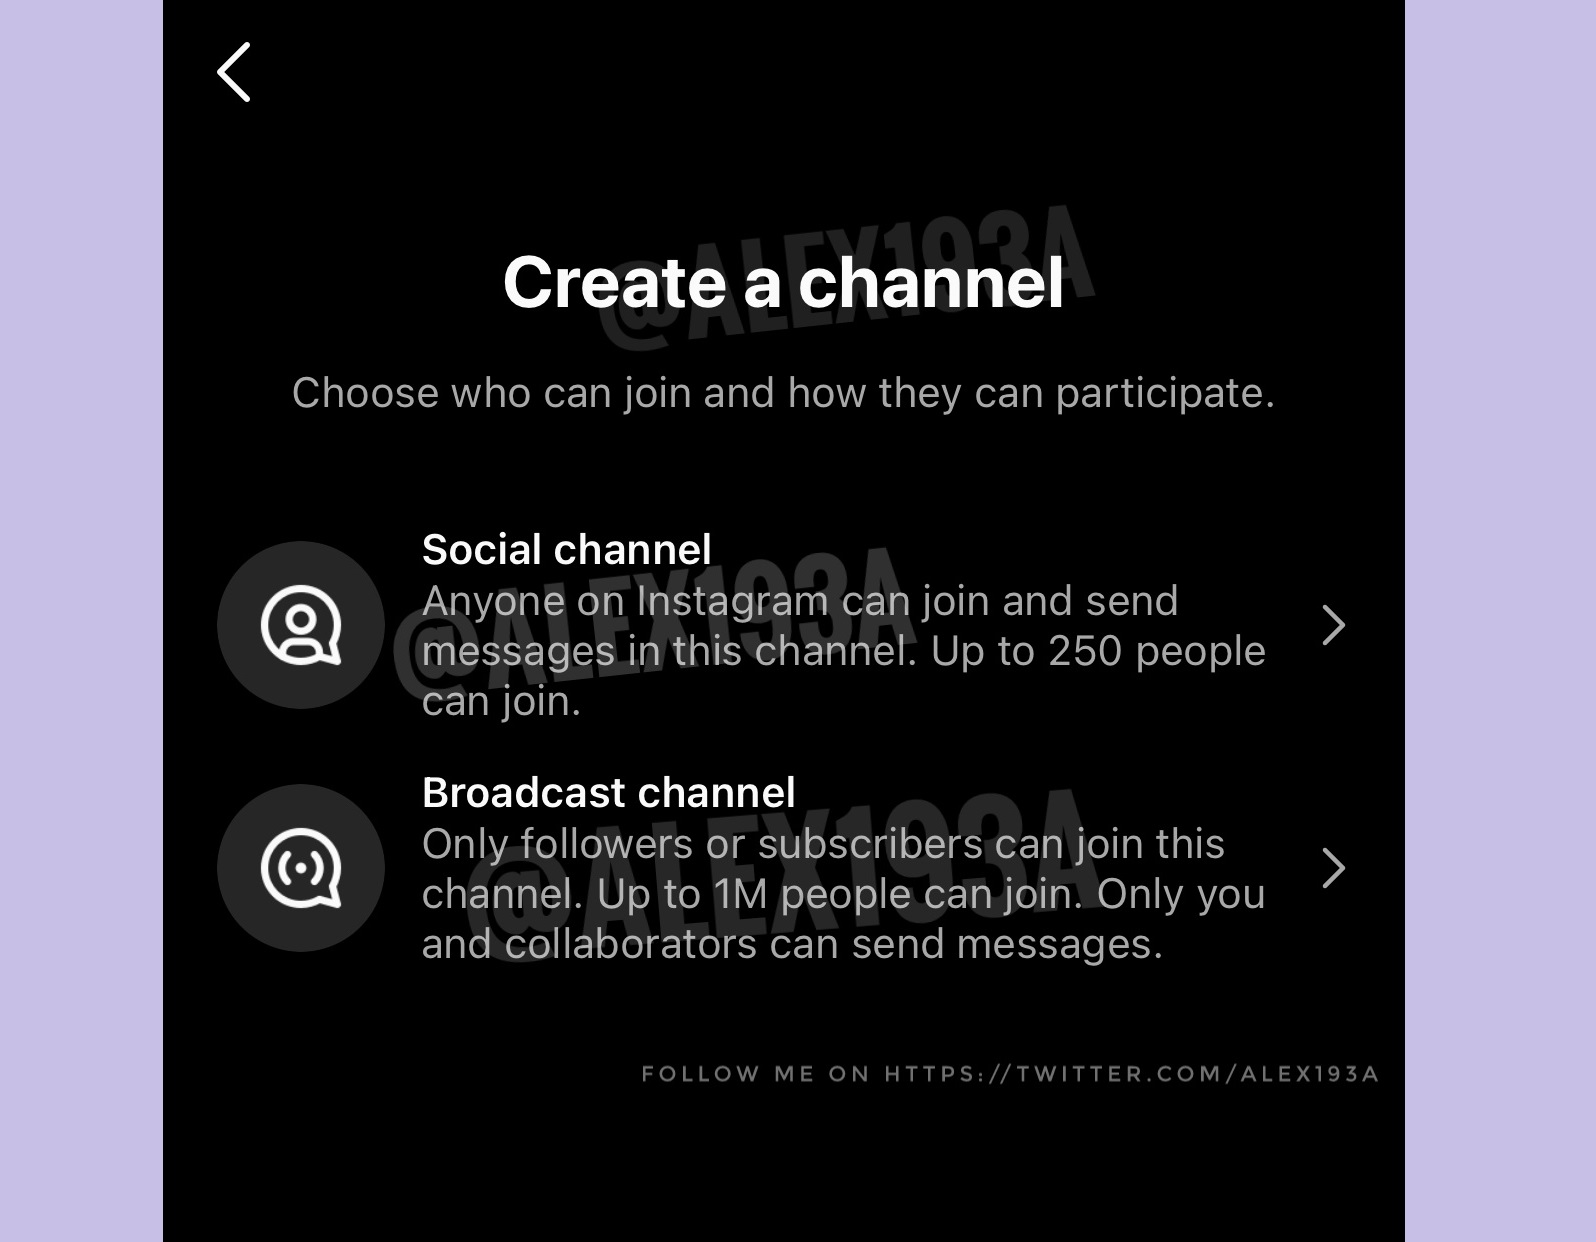 Instagram users will soon be able to create Channels that host up